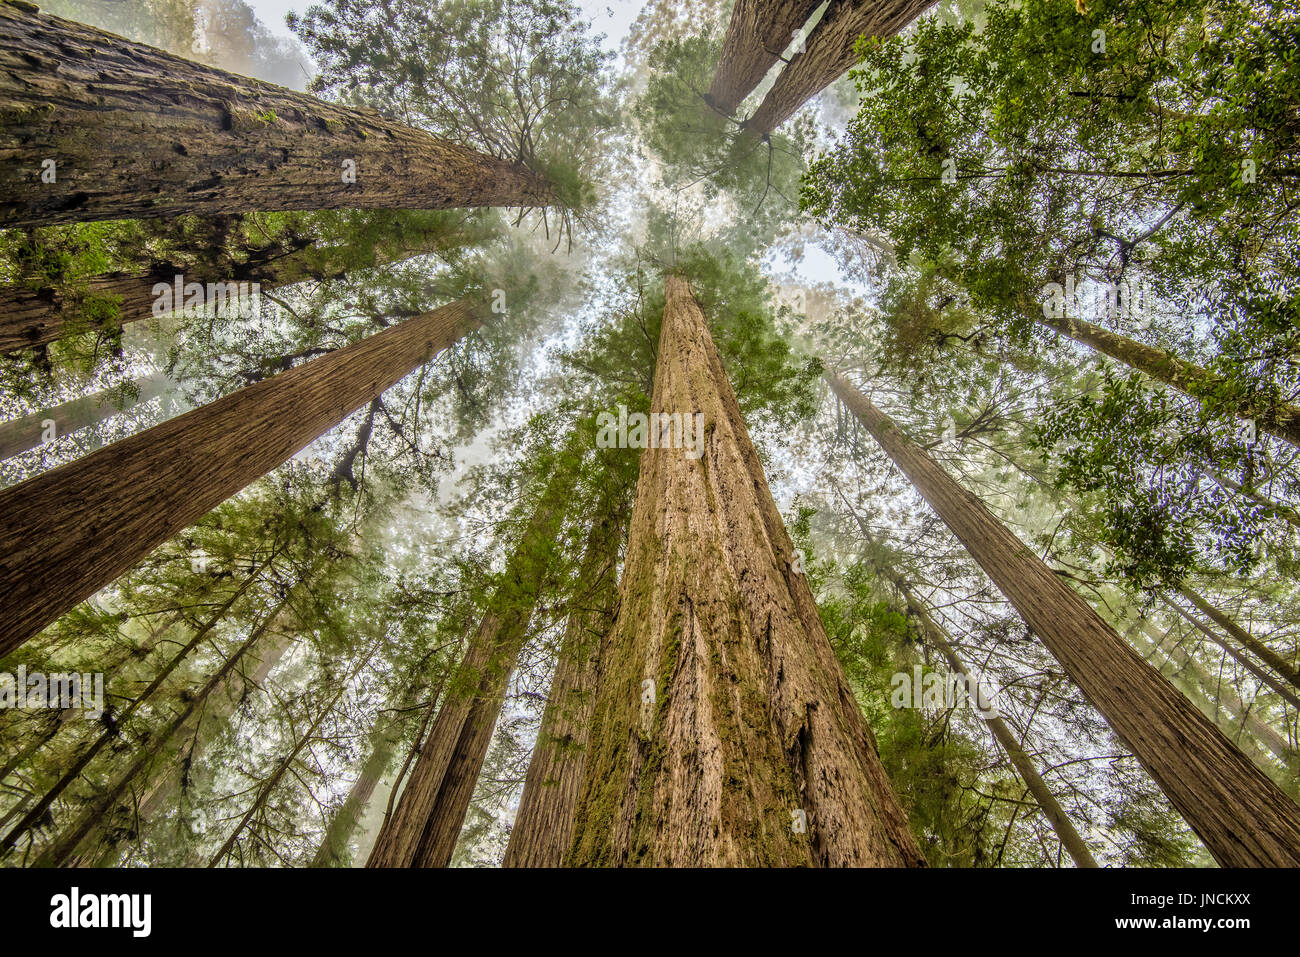 Redwood trees in Simpson-Reed Grove, Jedediah Smith State Park, California. Stock Photo